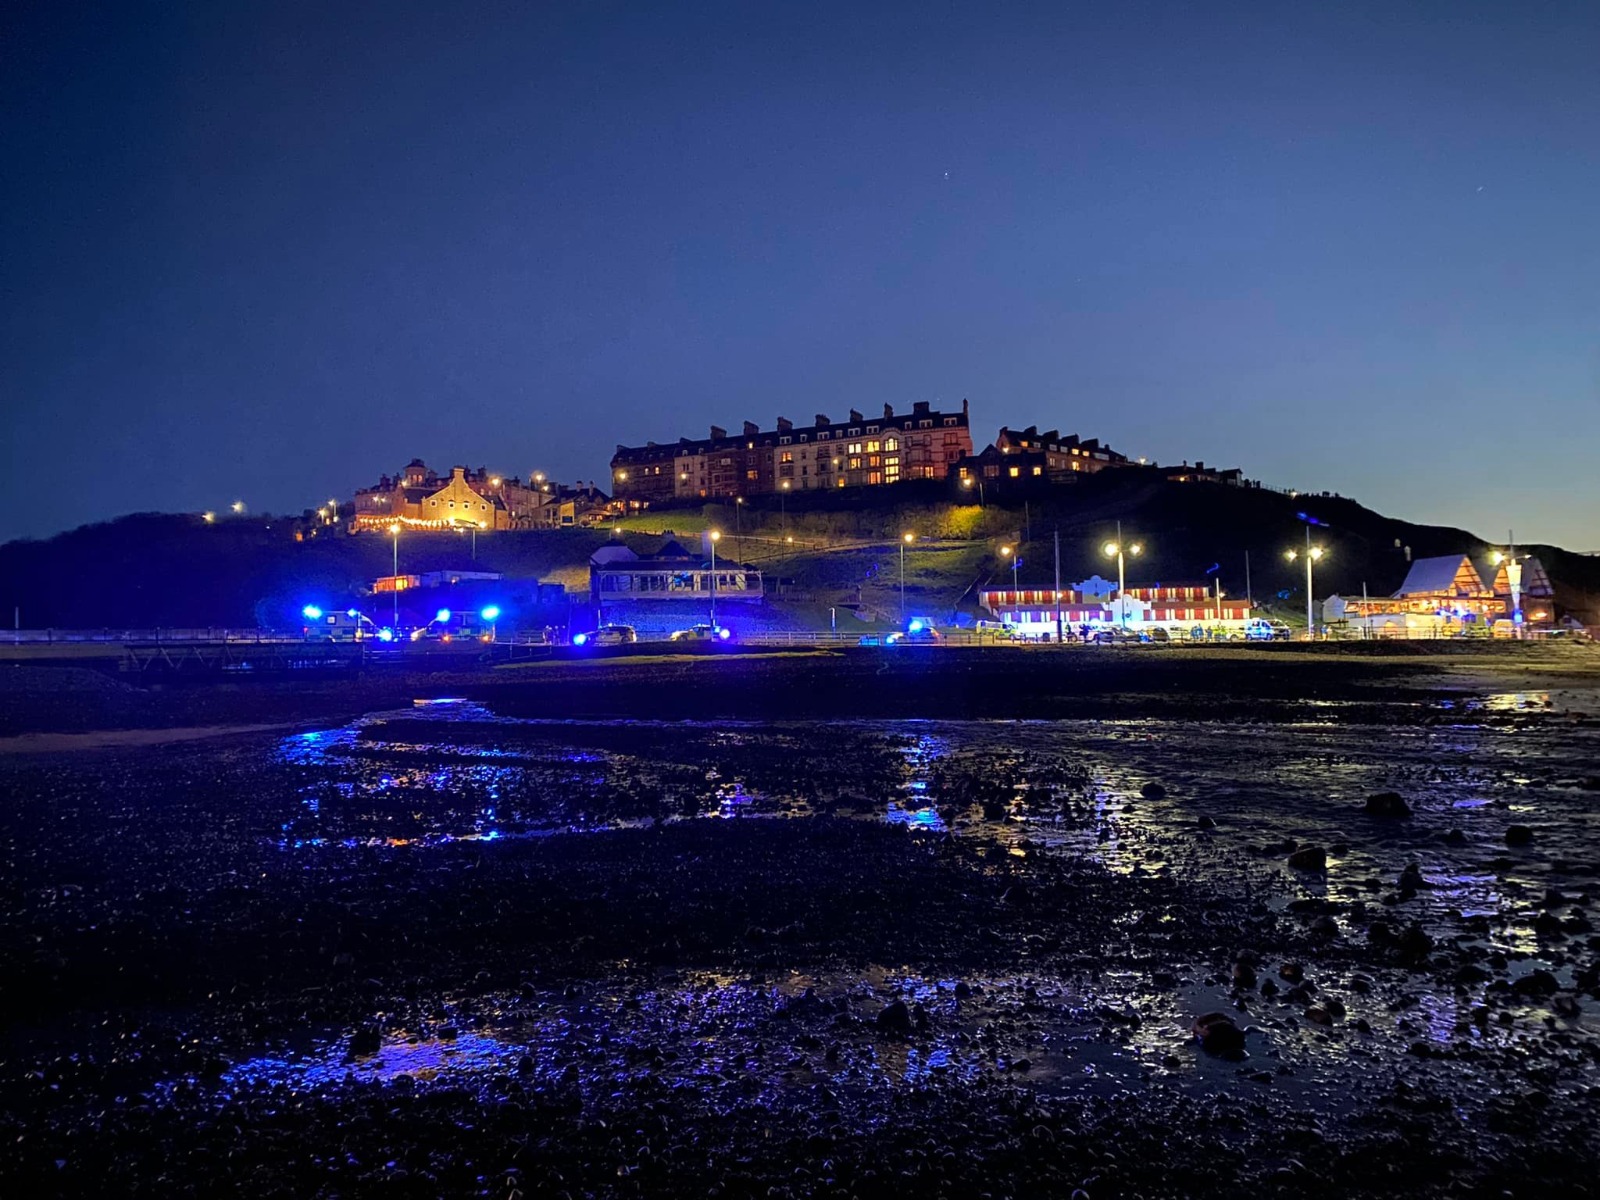 Saltburn beach incident: Four injured and man arrested